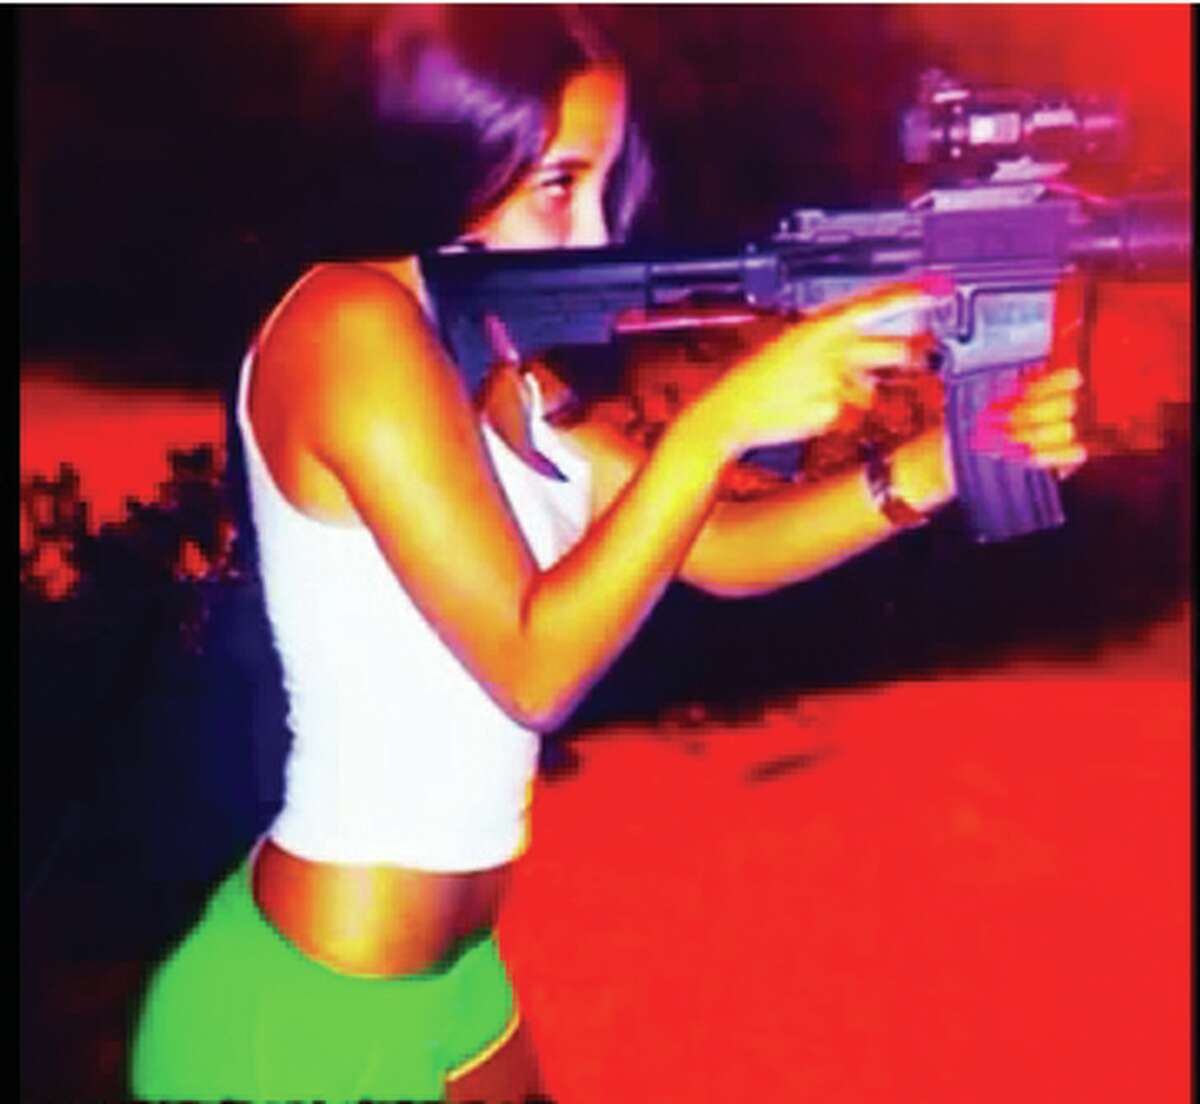 The Mexican outlet El Blog del Narco has published photos purportedly showing women associated with drug cartels posing — some masked, others in various states of undress — with assault rifles, tigers, liquor and trucks.